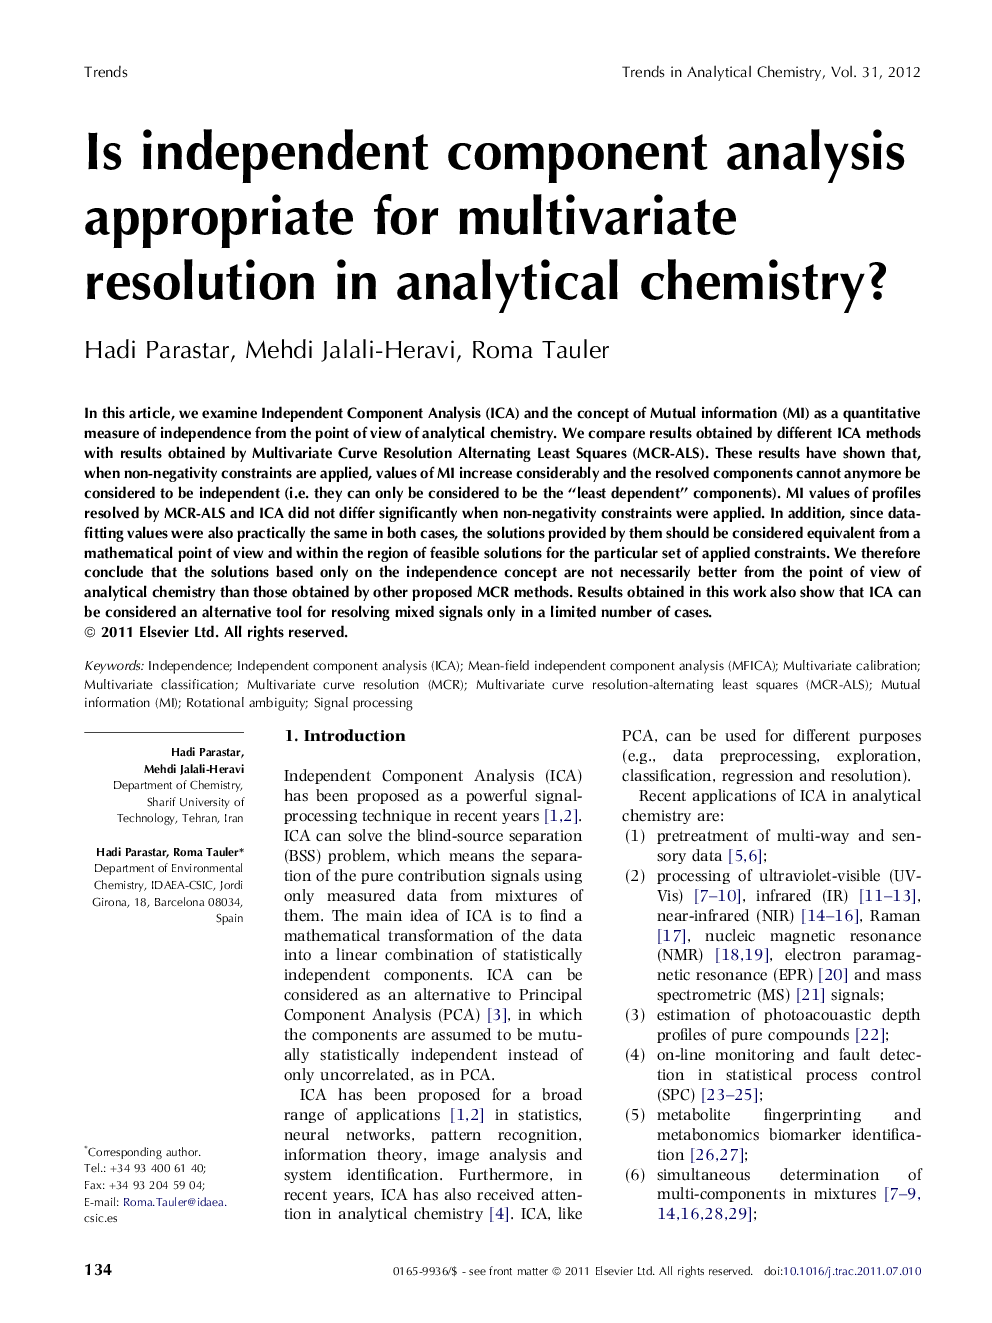 Is independent component analysis appropriate for multivariate resolution in analytical chemistry?